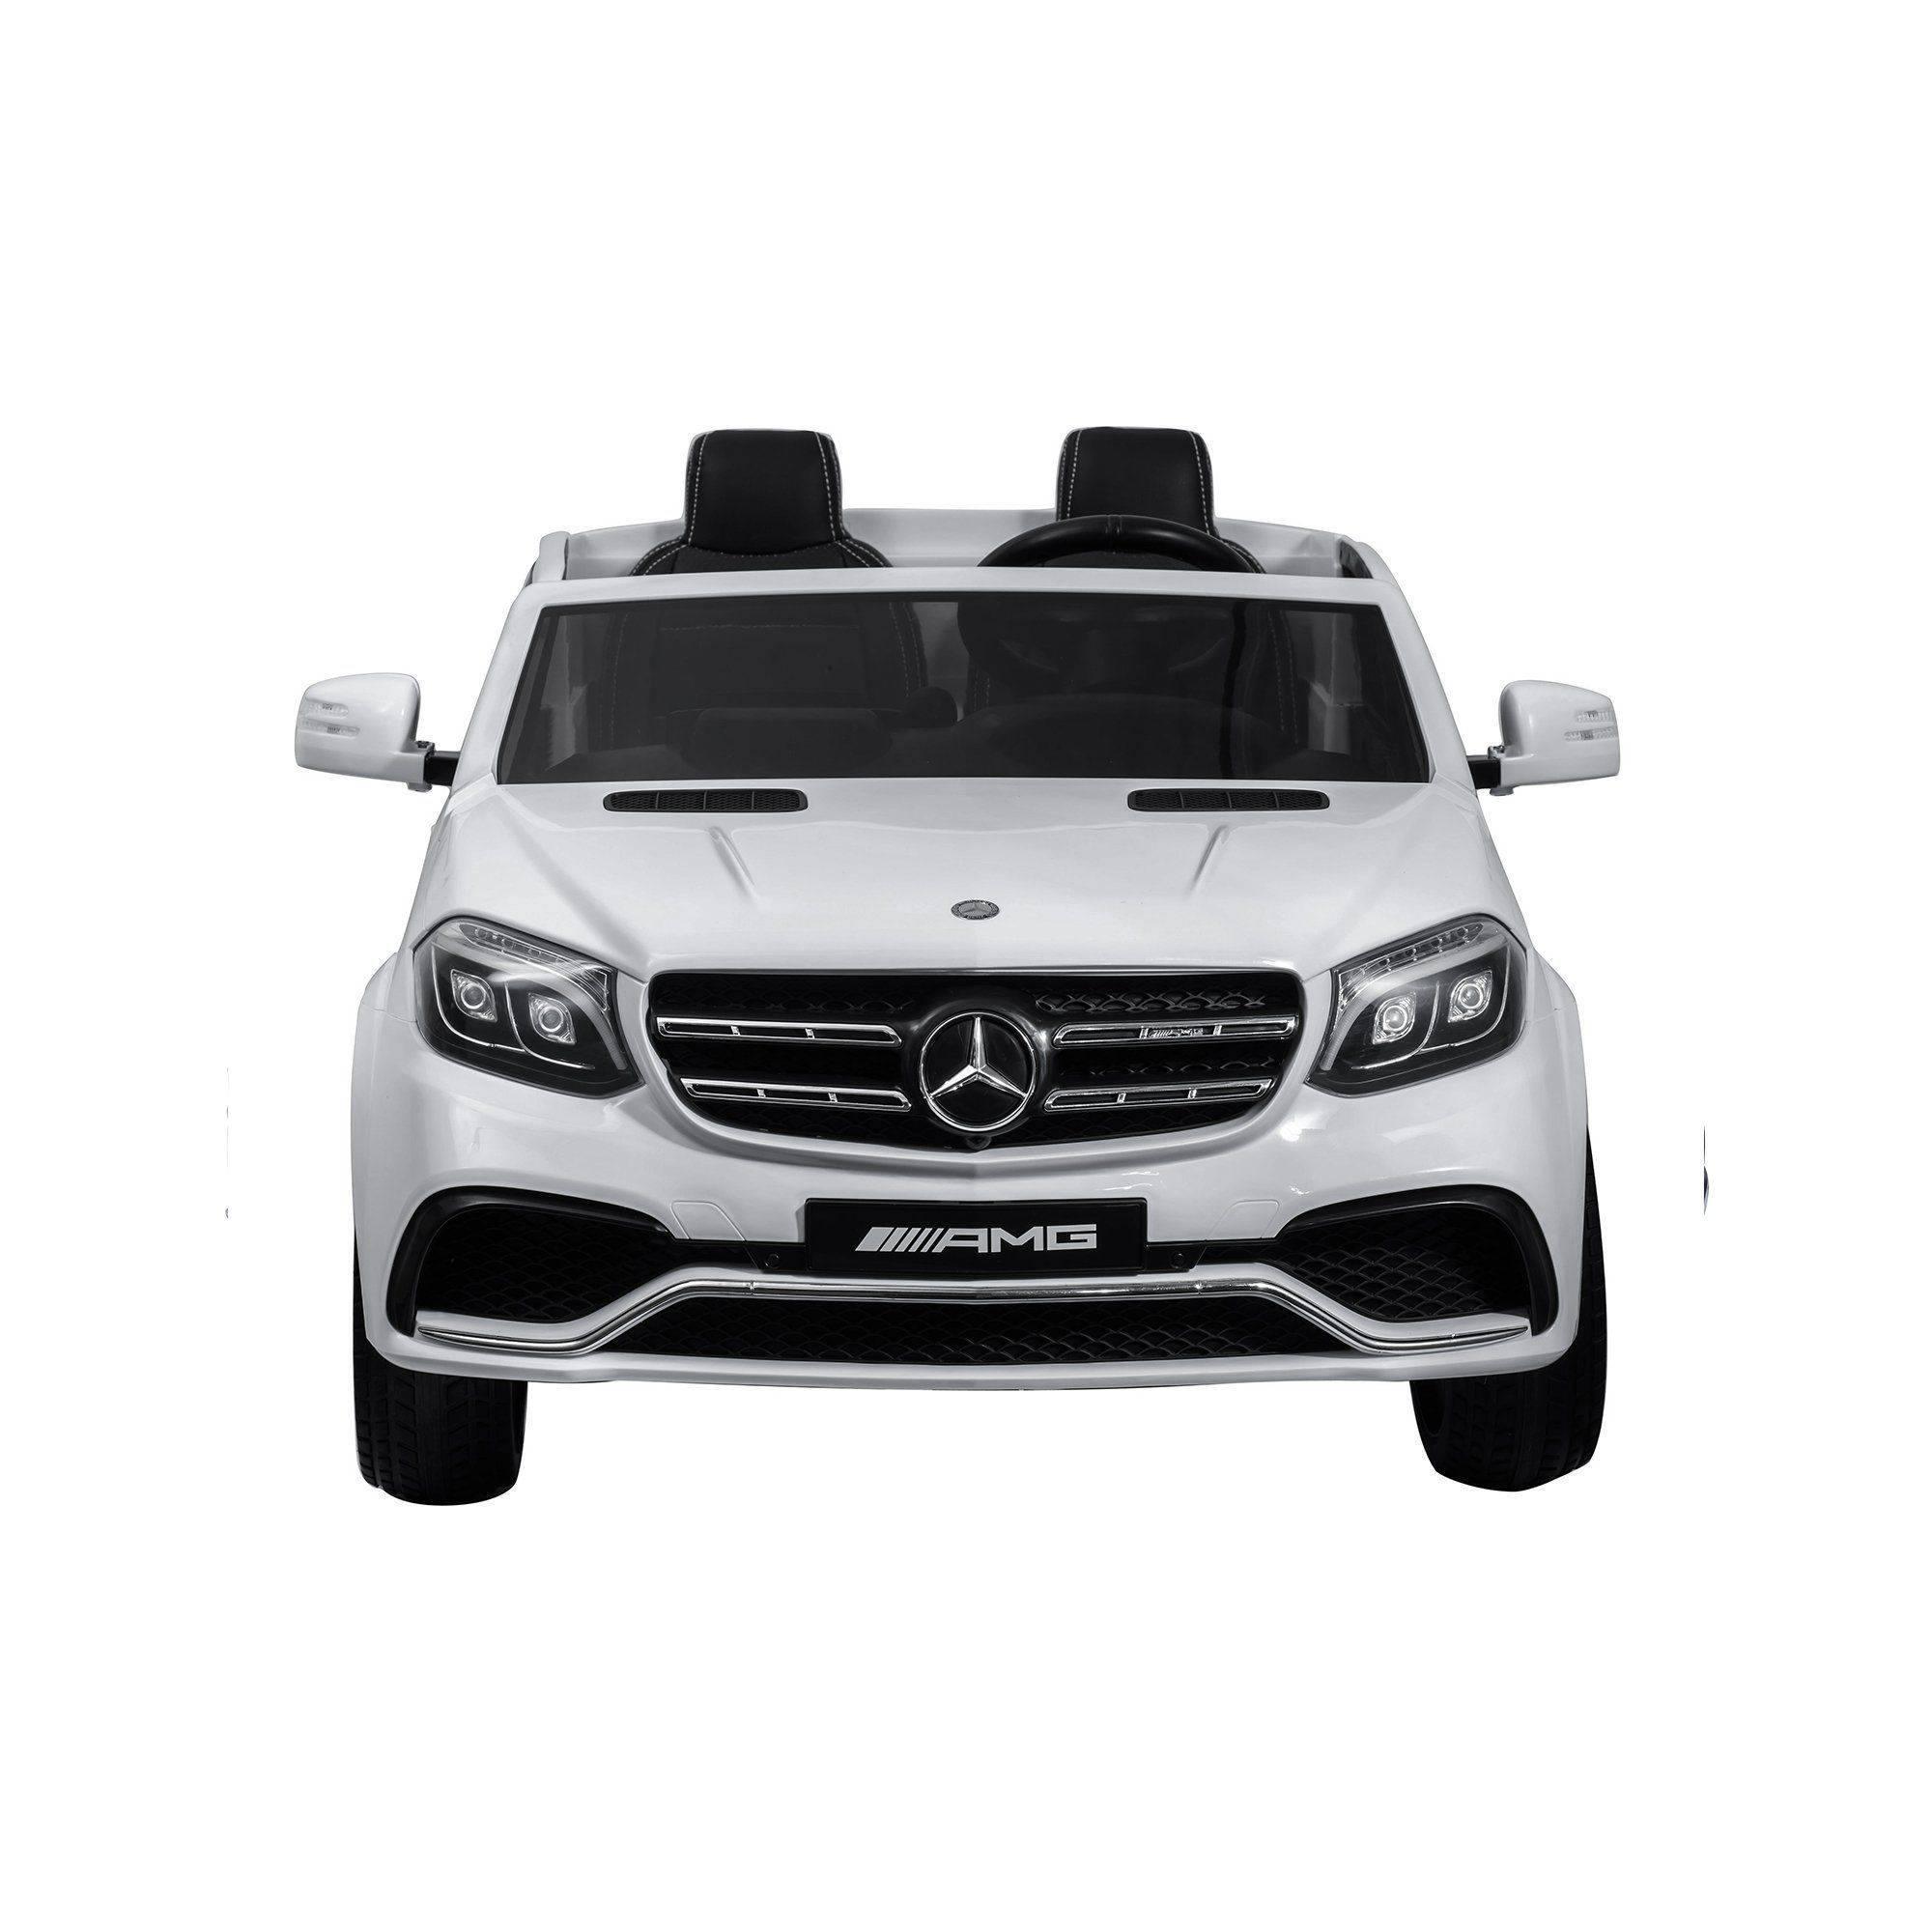 Licensed Mercedes Benz GLS63 12V Battery Operated 2 Seater Ride On Car With Parental Remote by Freddo - American Kids Cars